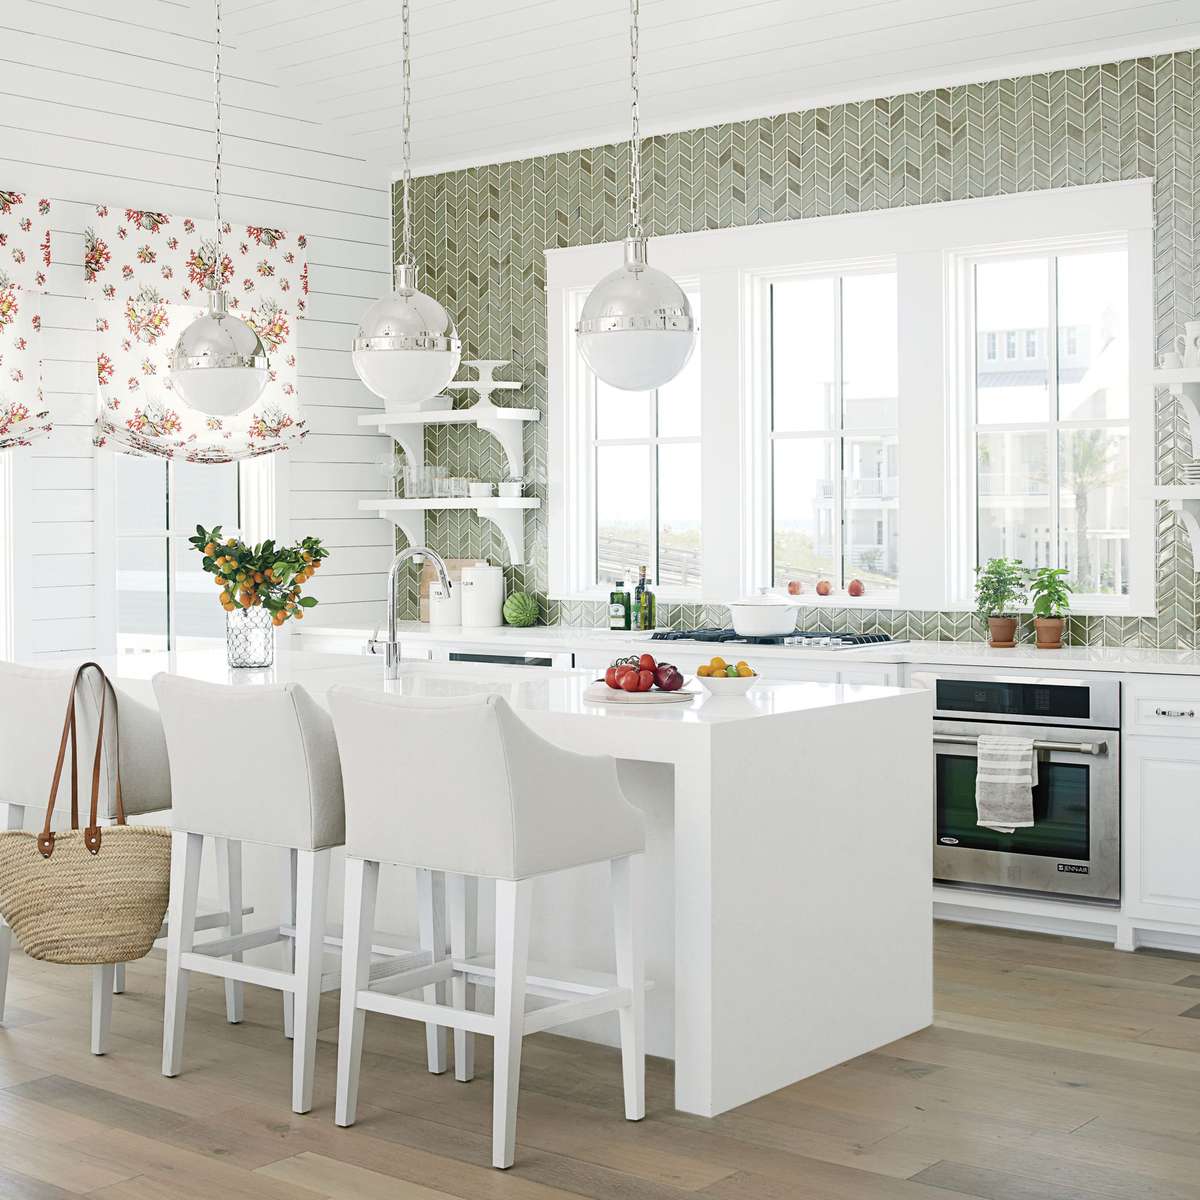 This kitchen reminds us of one of those movies with a star-studded ensemble cast that make it shine start-to-finish. Here, the stars are all manner of smart ideas: olive ceramic tile backsplash climbing all the way to the ceiling, big windows, and more.